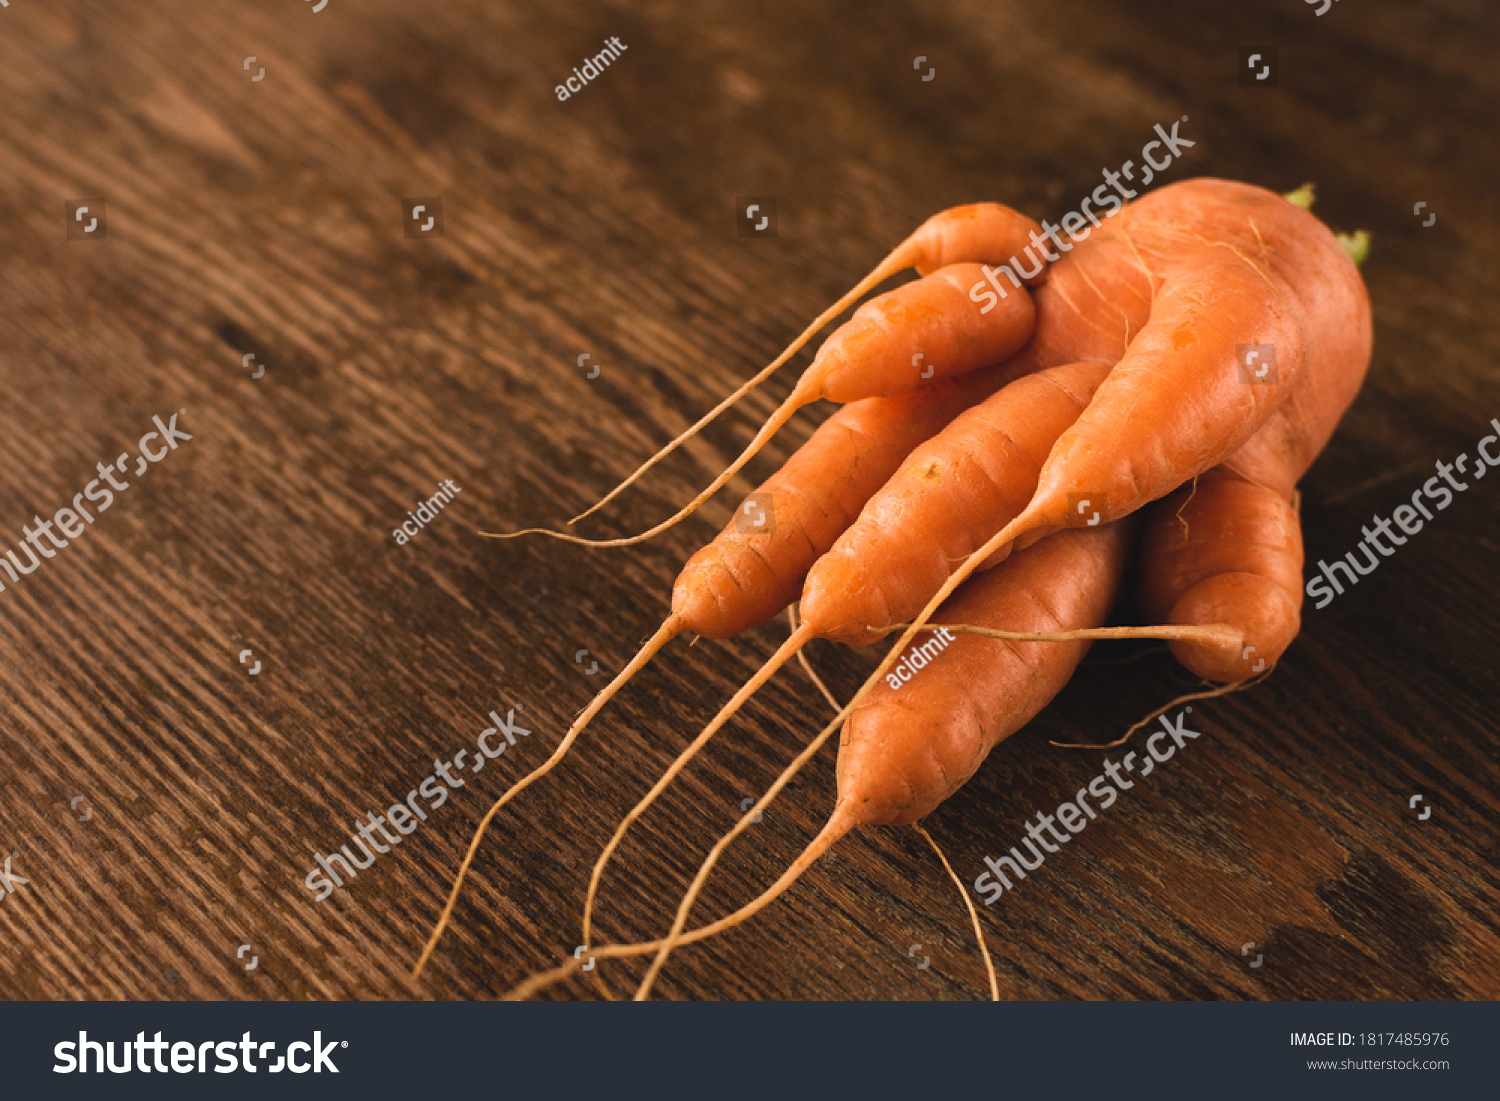 Ugly carrot on a wooden background. Funny, unnormal vegetable or food waste concept. Horizontal orientation #1817485976